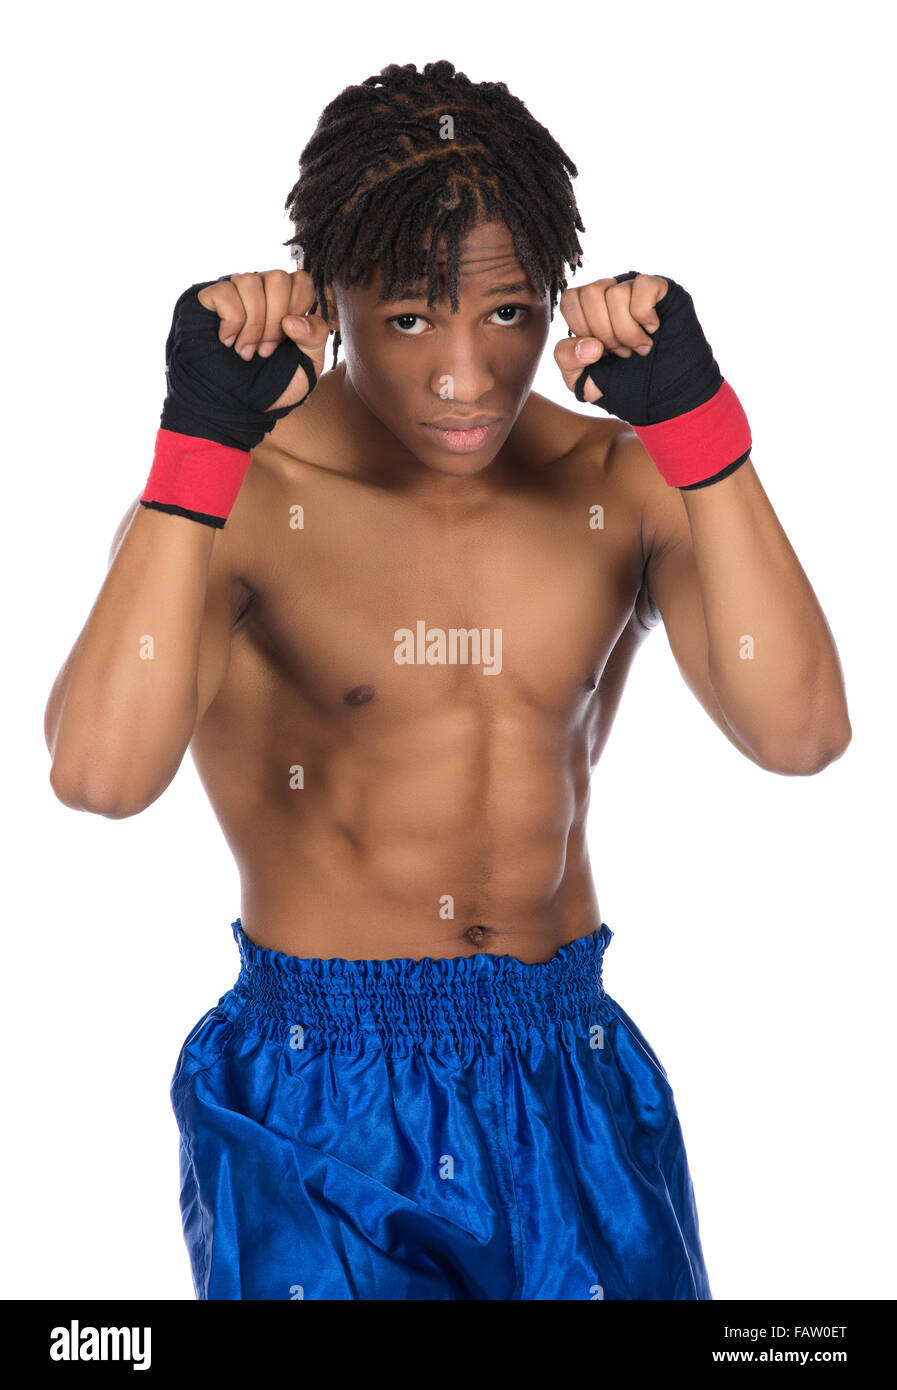 https://c8.alamy.com/comp/FAW0ET/young-muscular-athletic-male-boxer-wearing-blue-boxing-shorts-and-FAW0ET.jpg